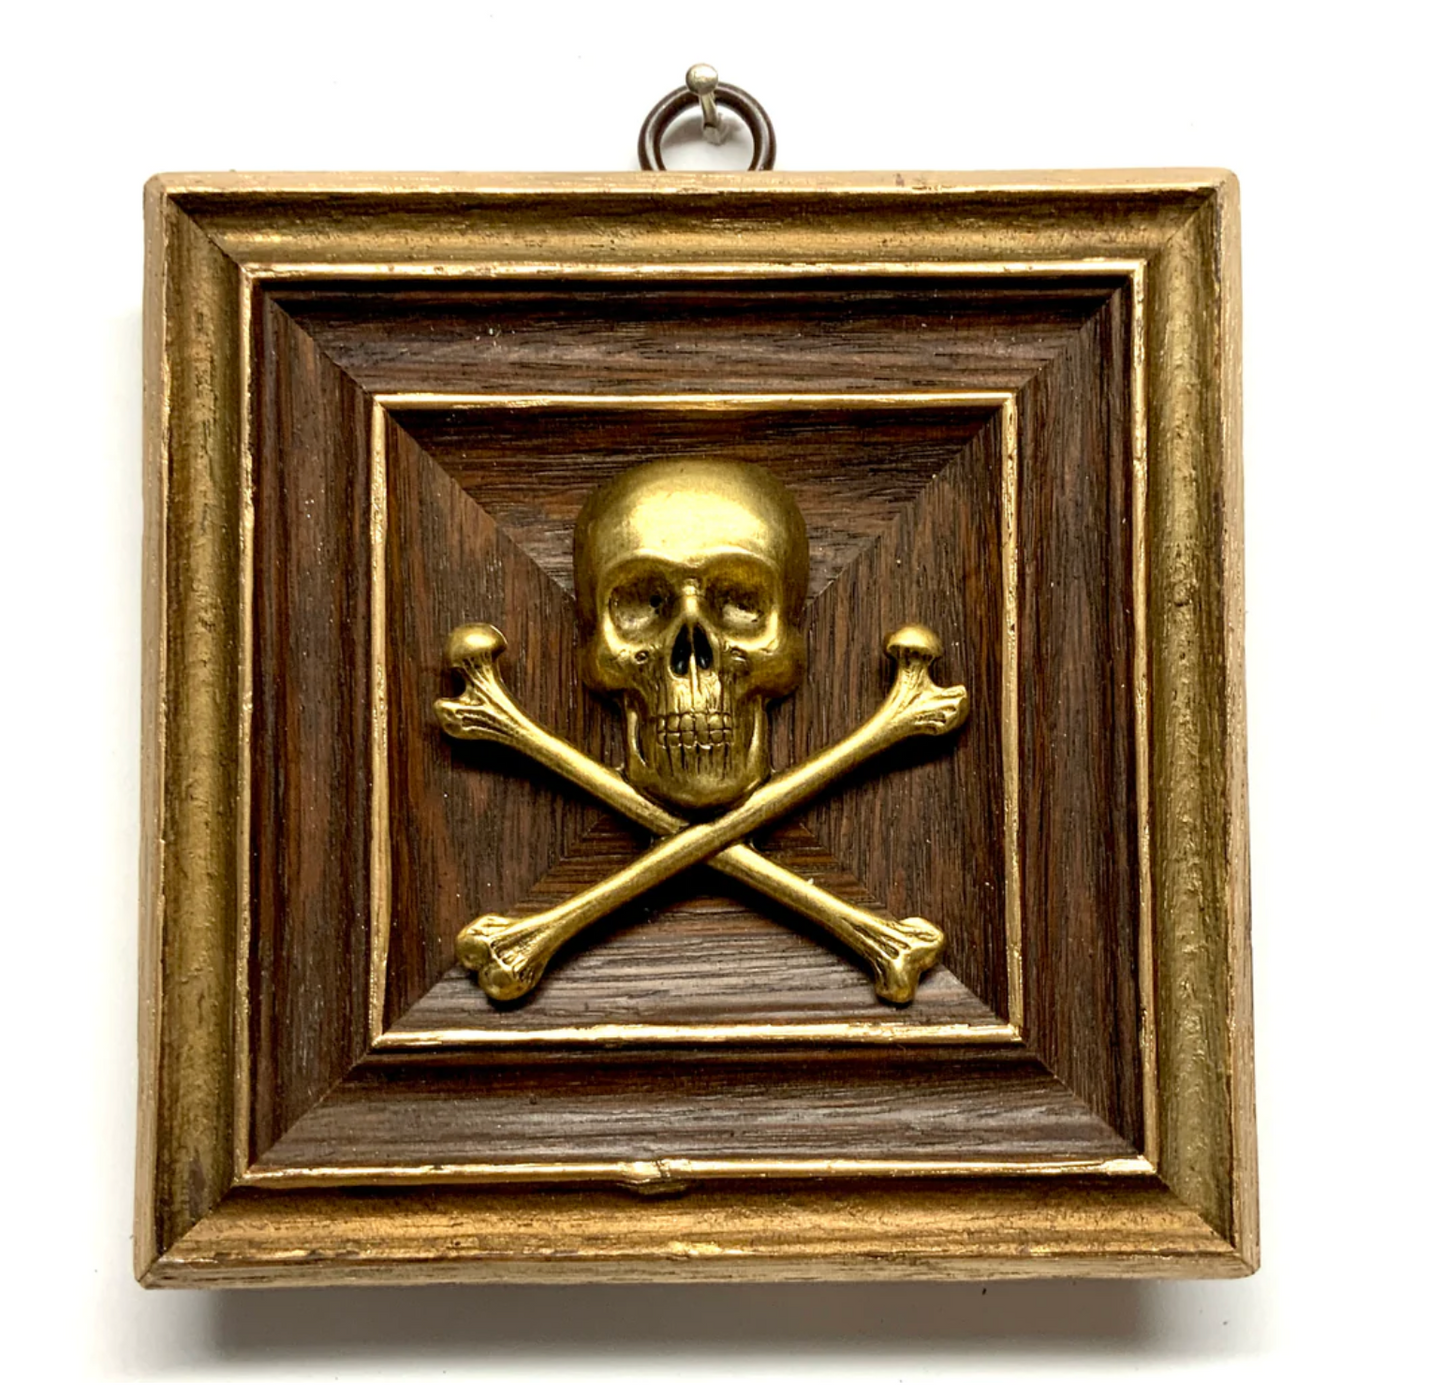 Wooden Frame with Skull and Crossbones